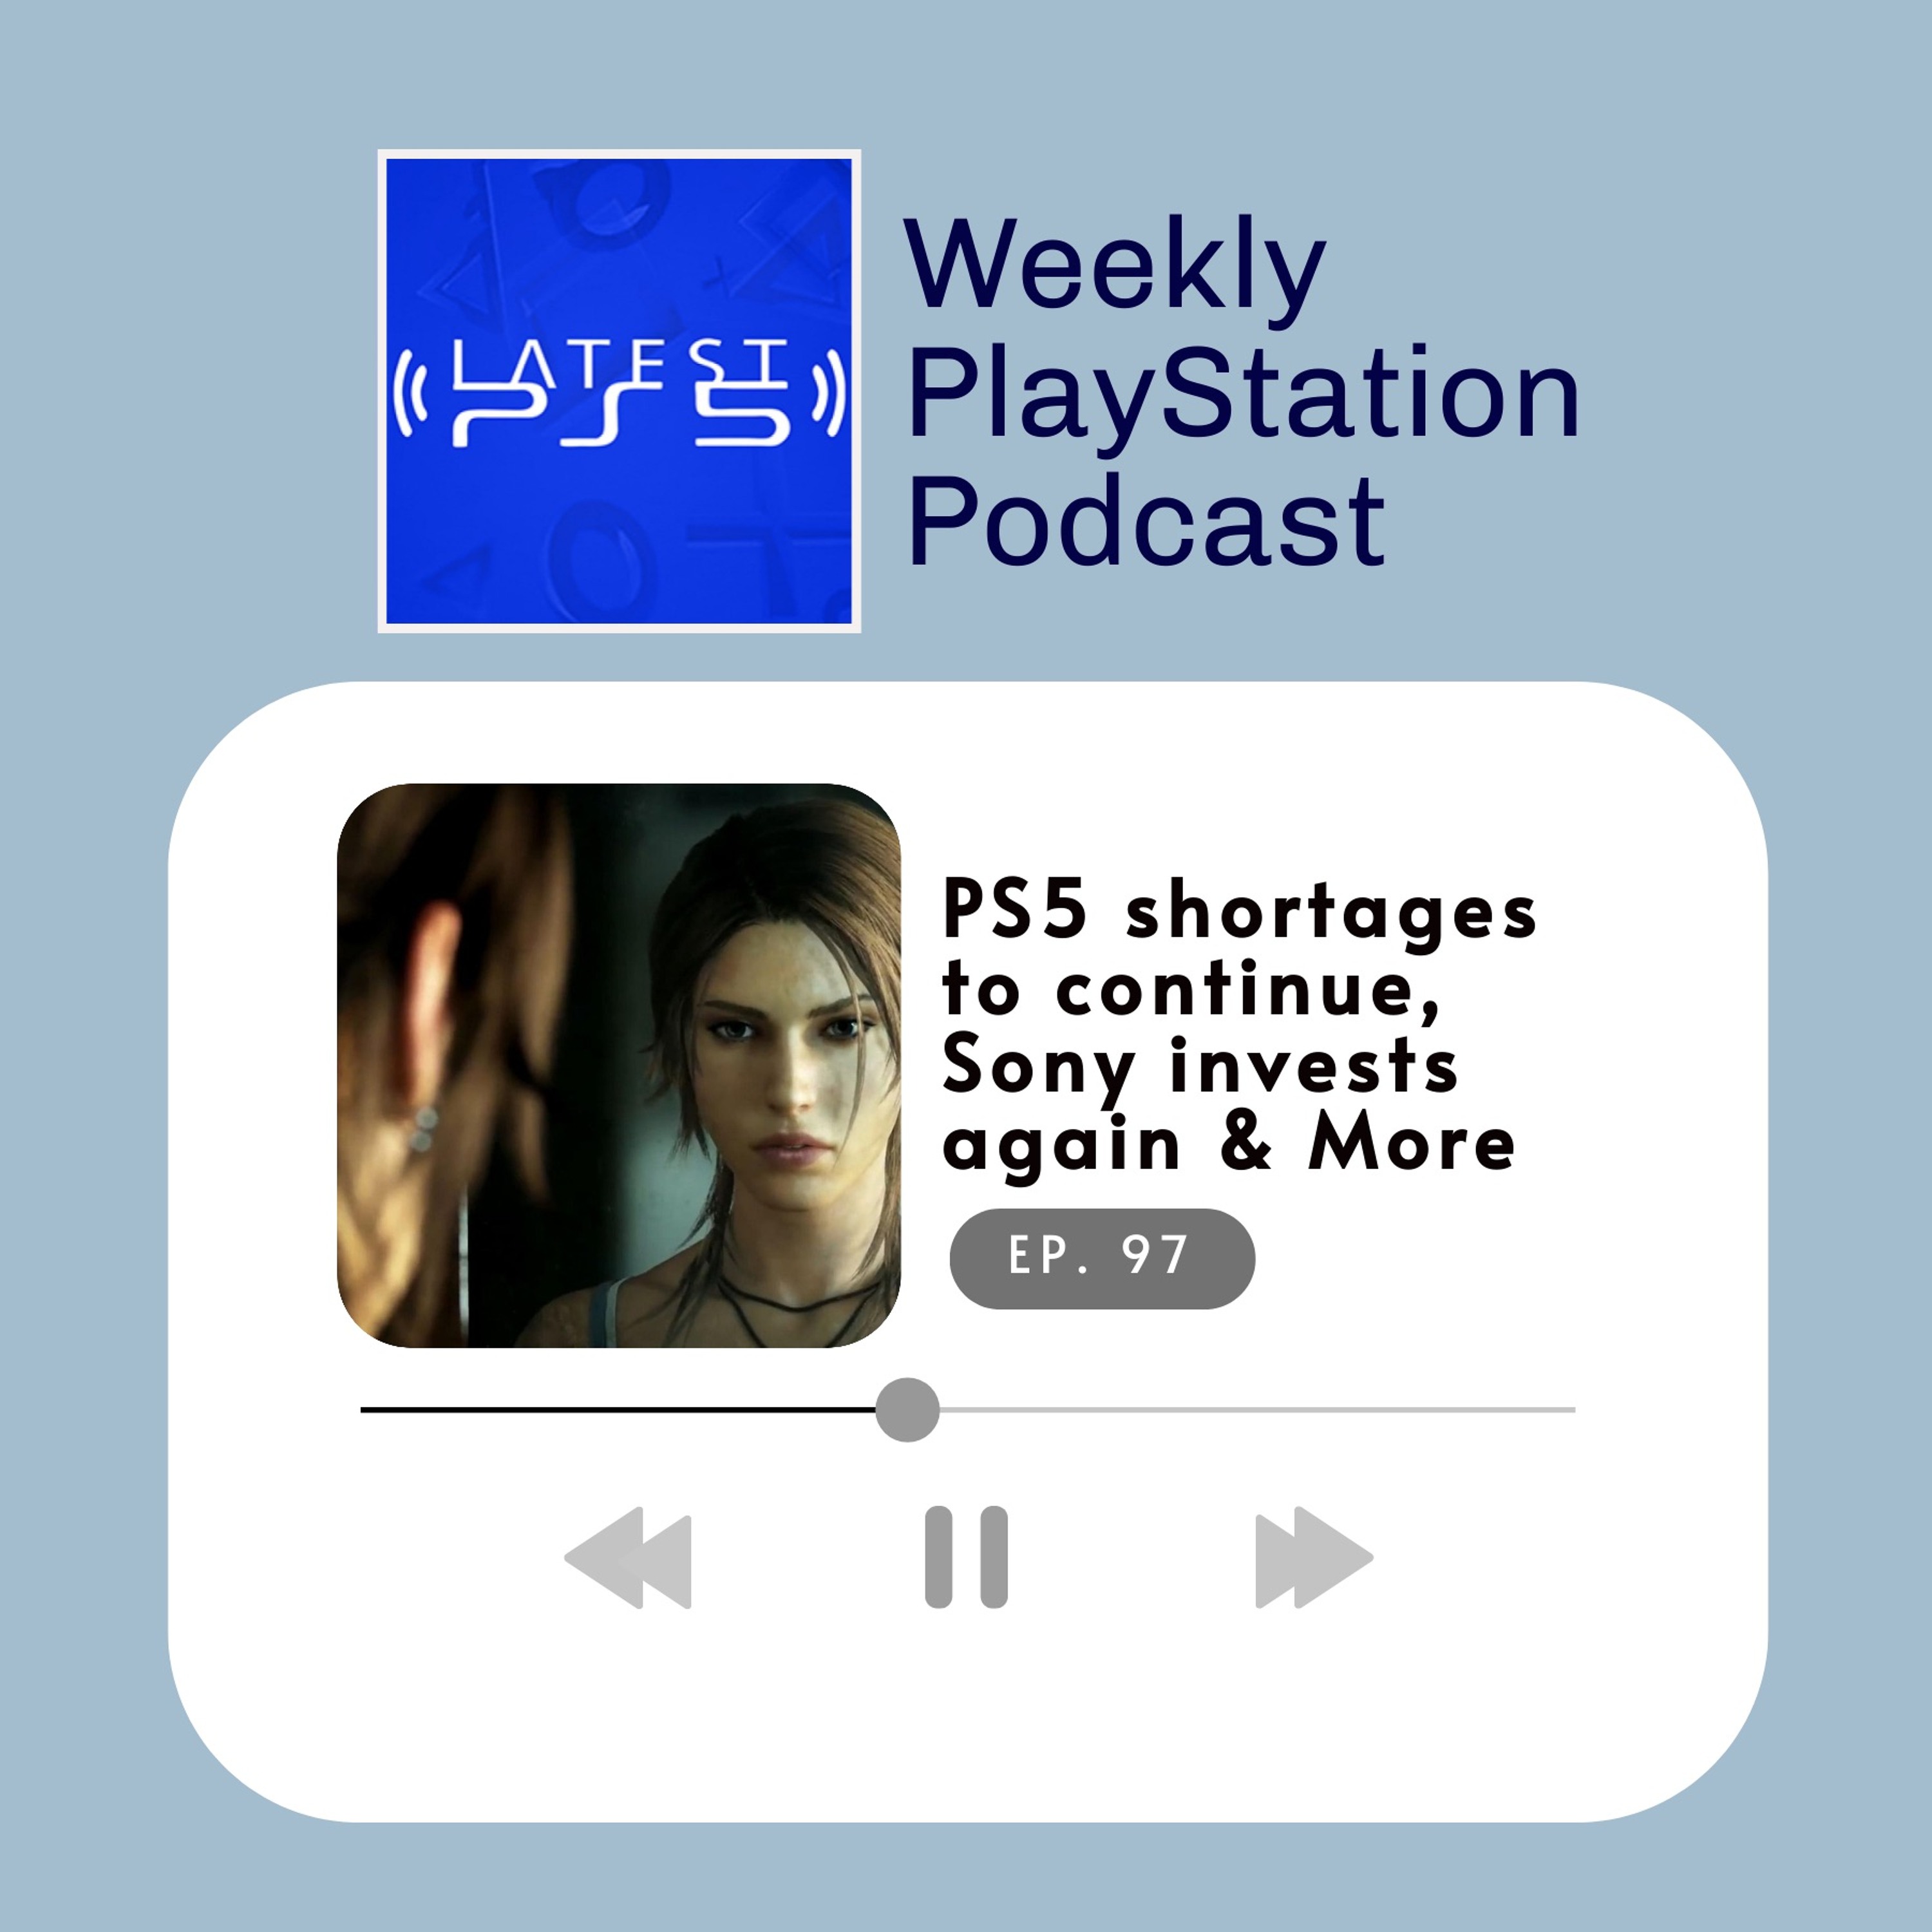 PS5 Shortages to continue, Sony invests again & More - episode 97